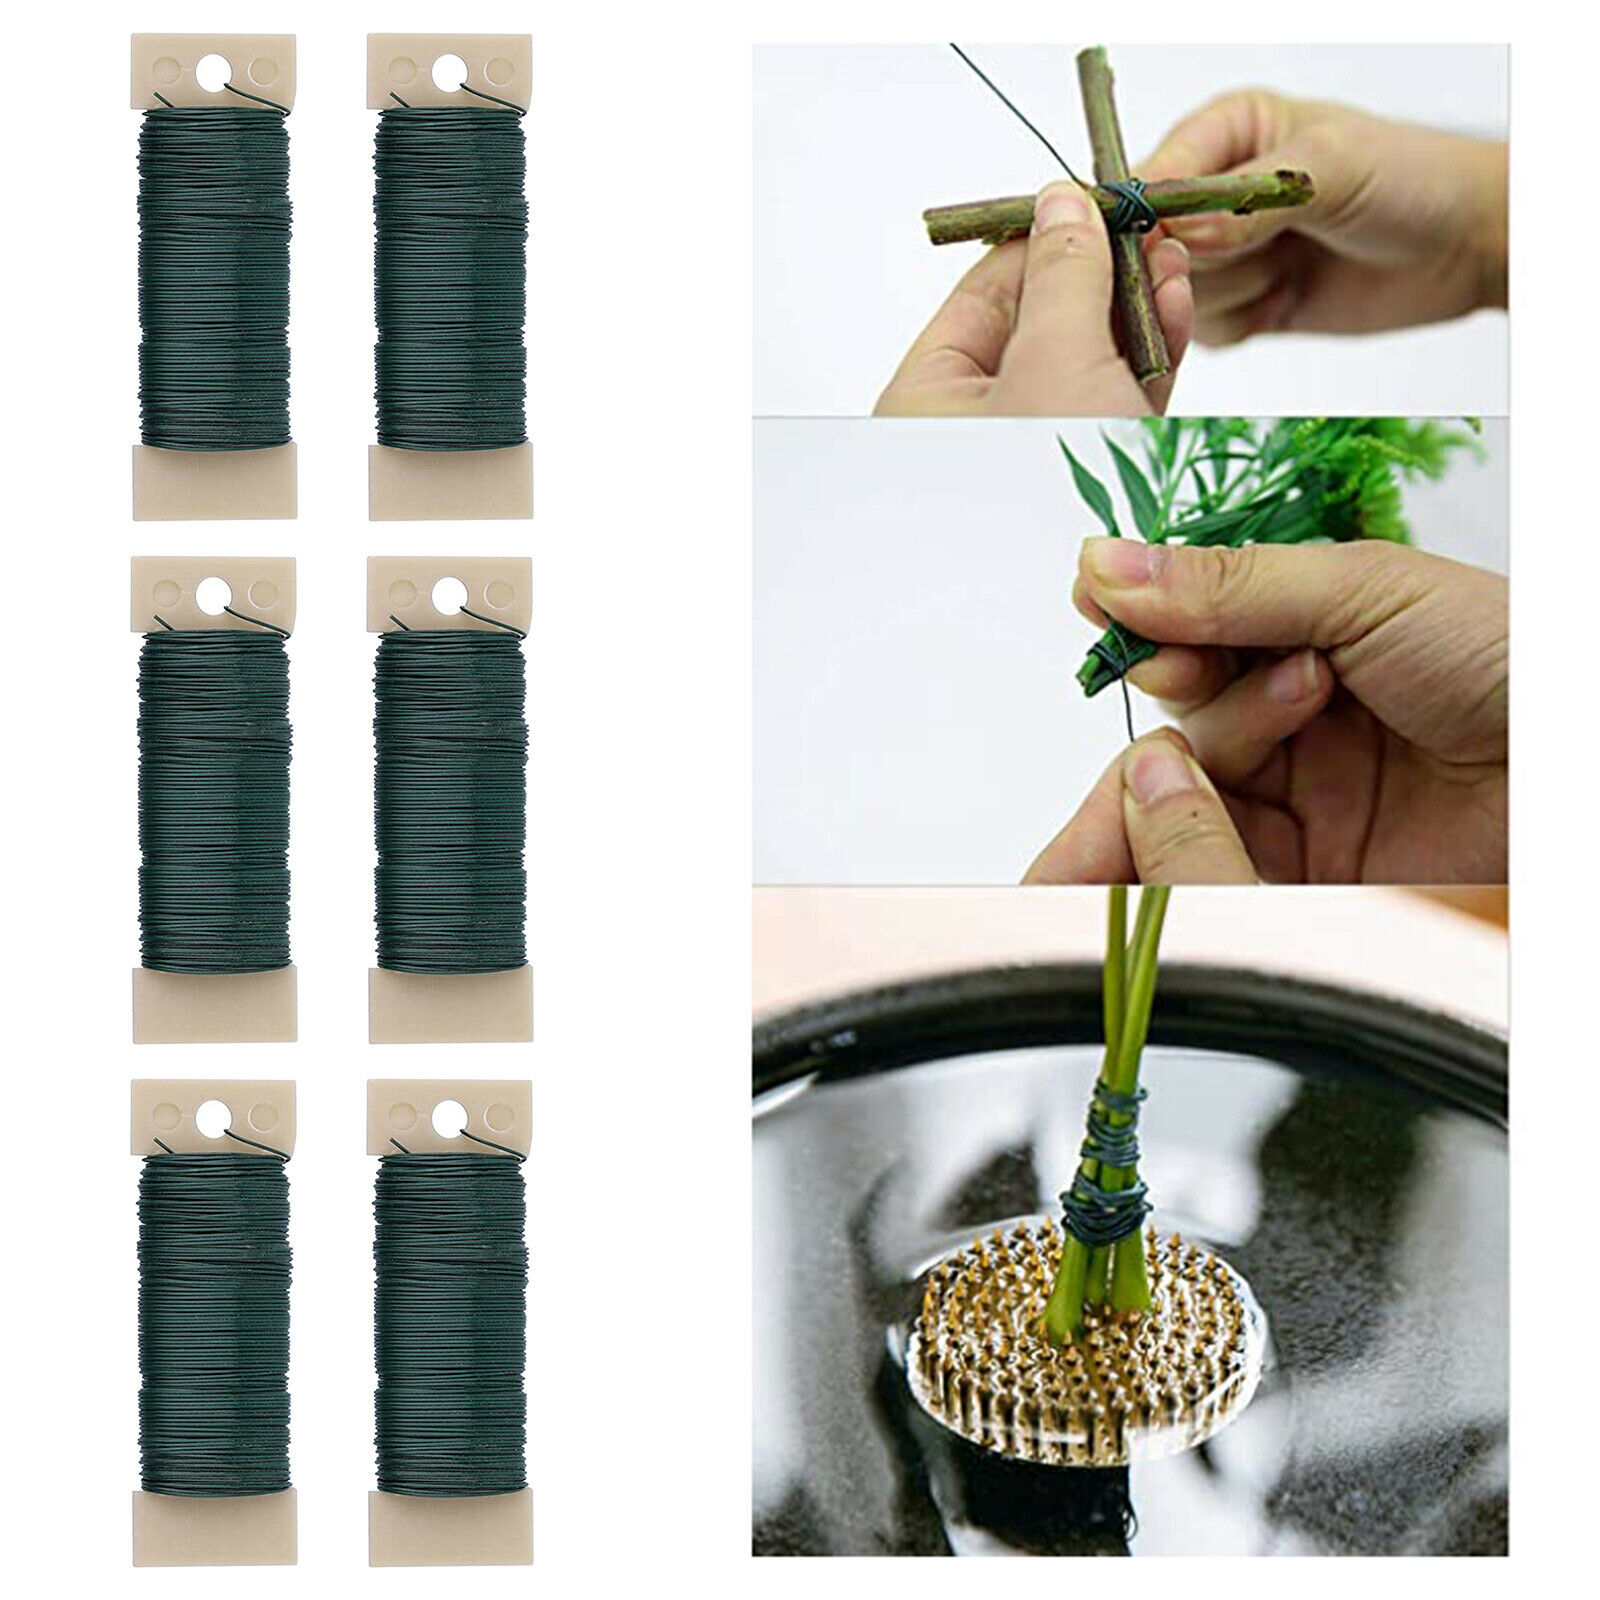 6 Pack Green Reel Floral Wire Lacquered Florist Wire Wreaths Crafts Diy